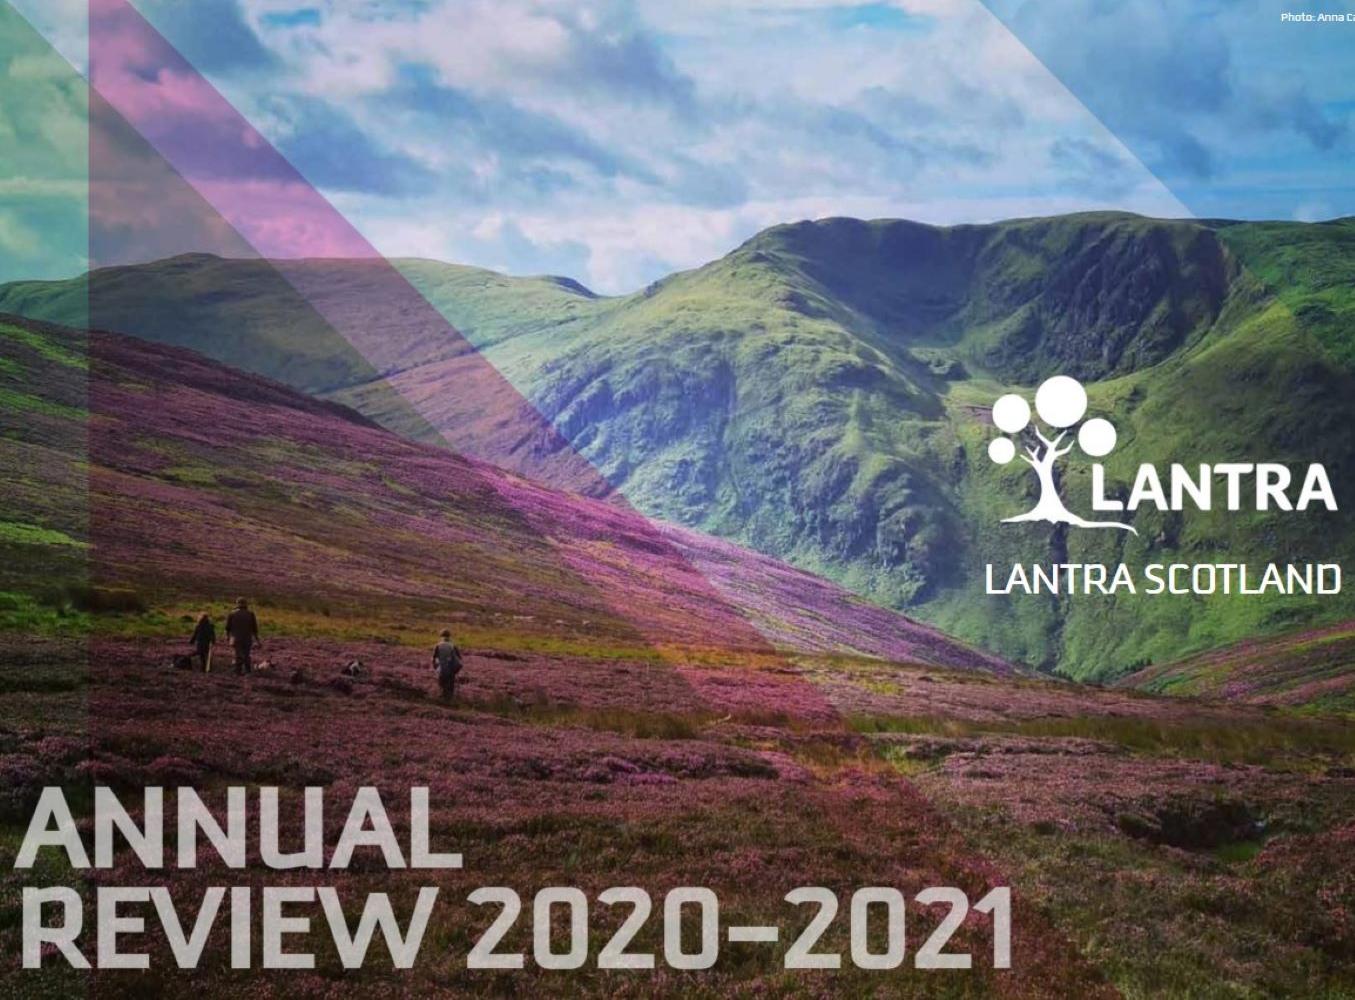 Scottish mountains on cover of Lantra Scotland annual review